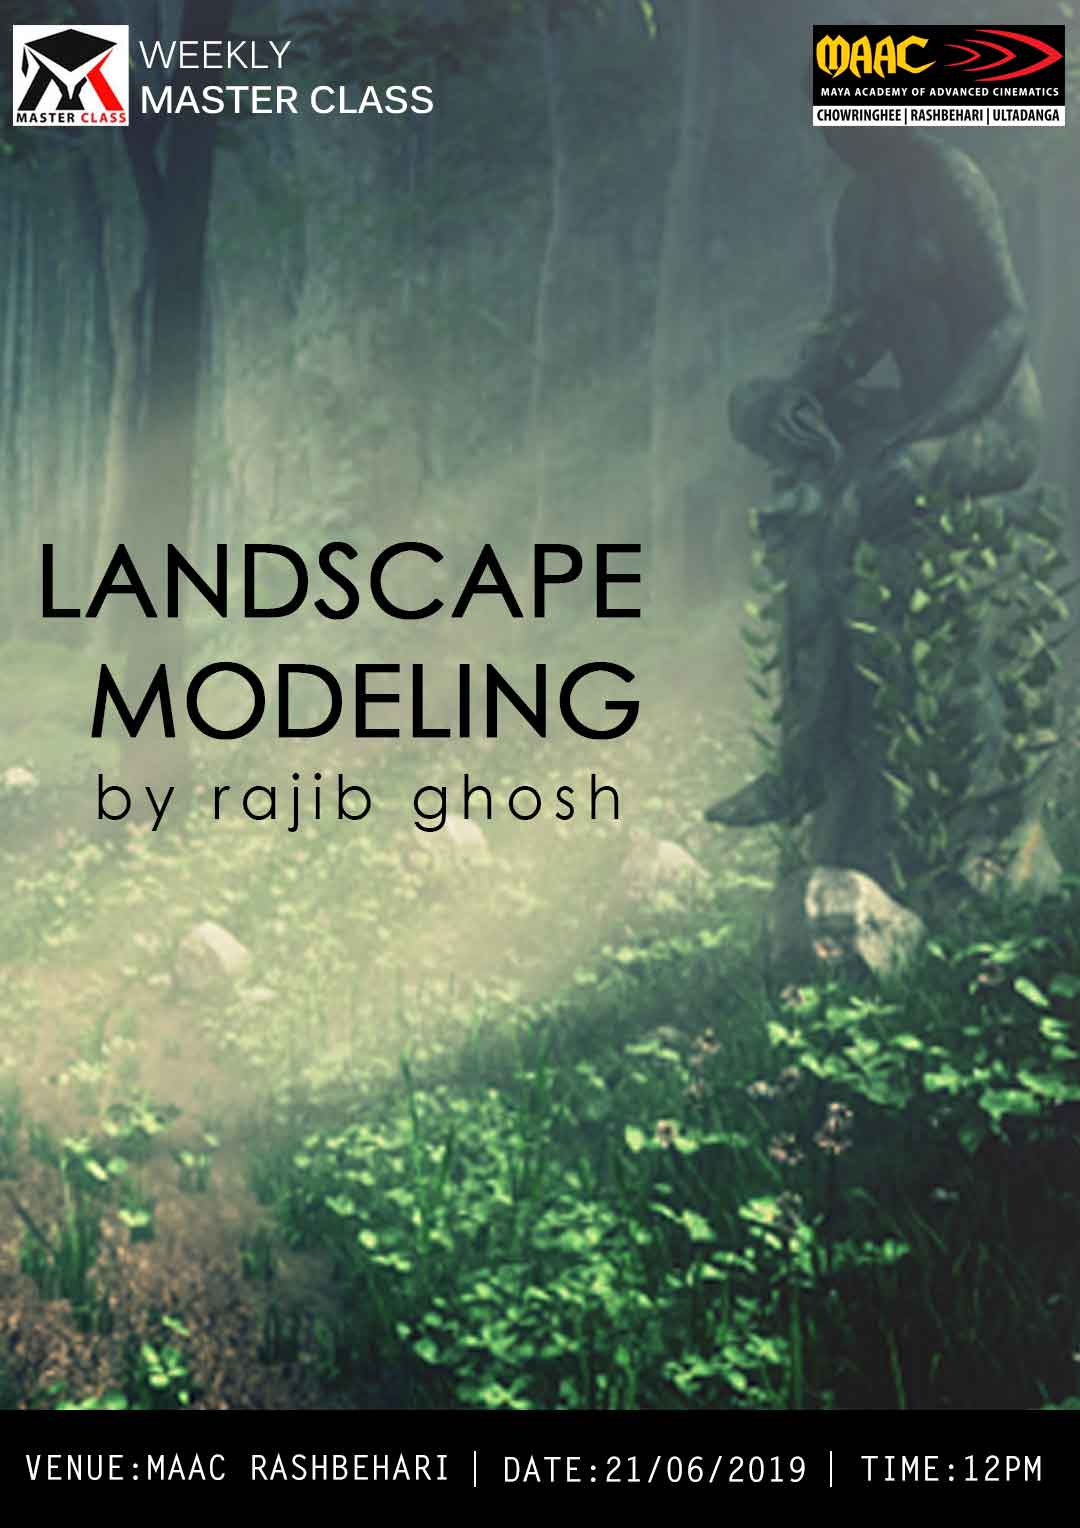 Weekly Master Class on Landscape Modeling